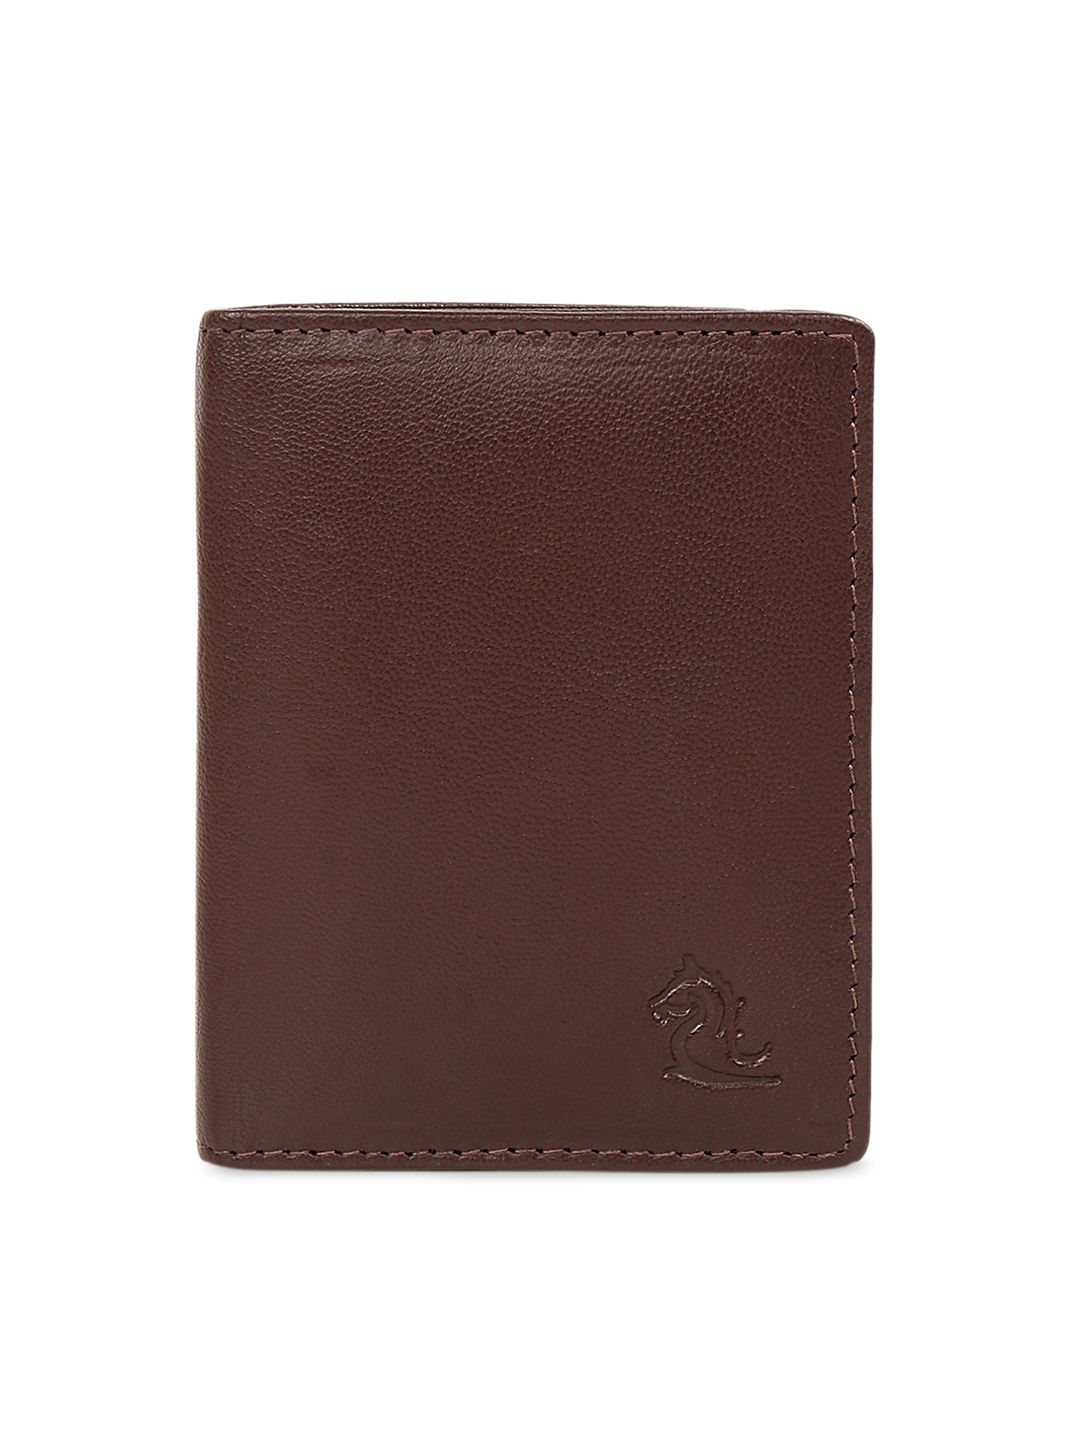 Kara Unisex Tan Brown Solid Leather Card Holder Price in India